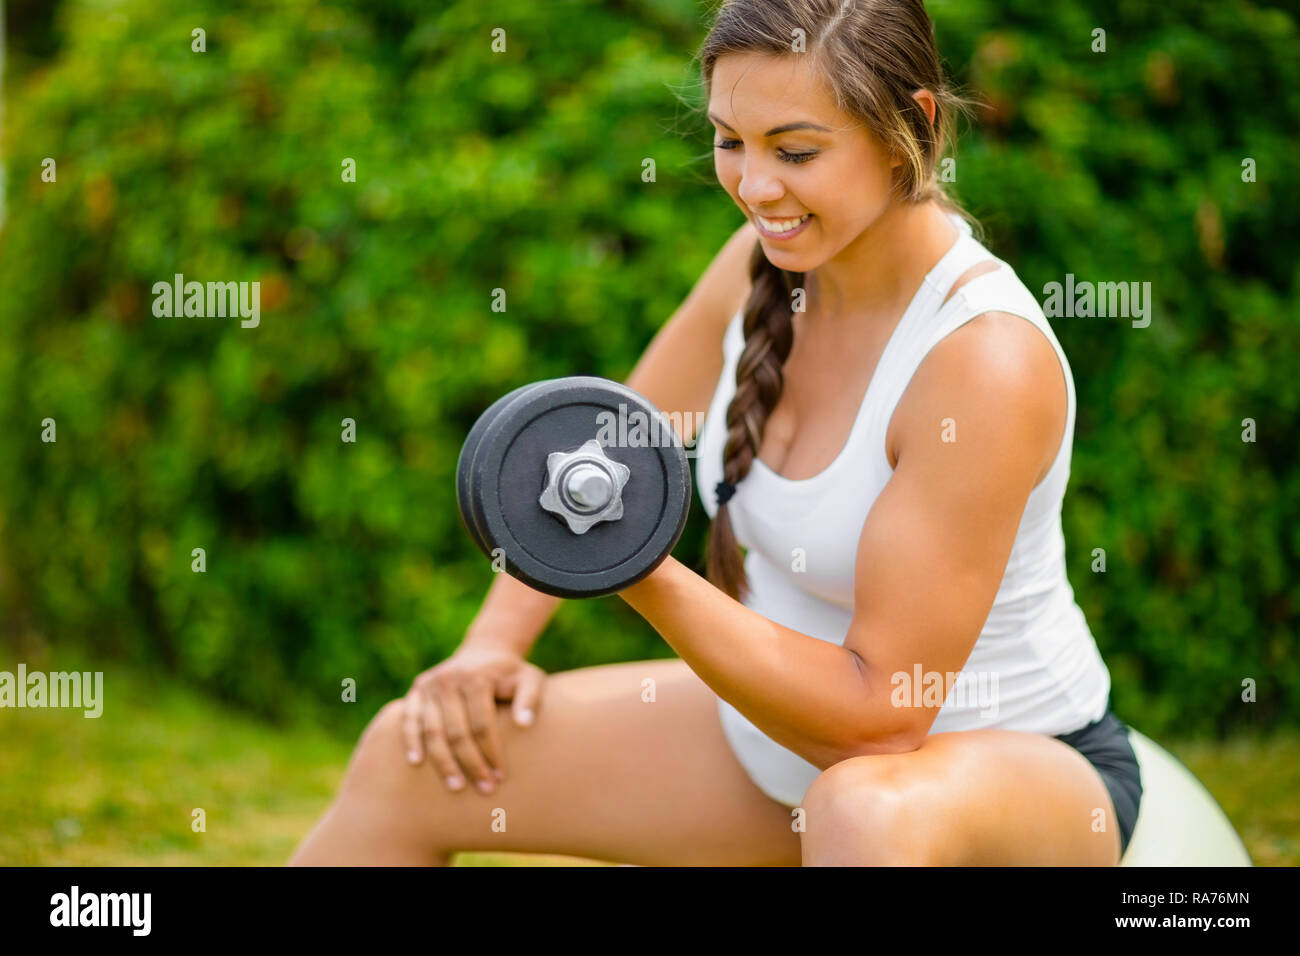 Expectant Female Exercising With Dumbbells To Strengthen Arms In Stock Photo